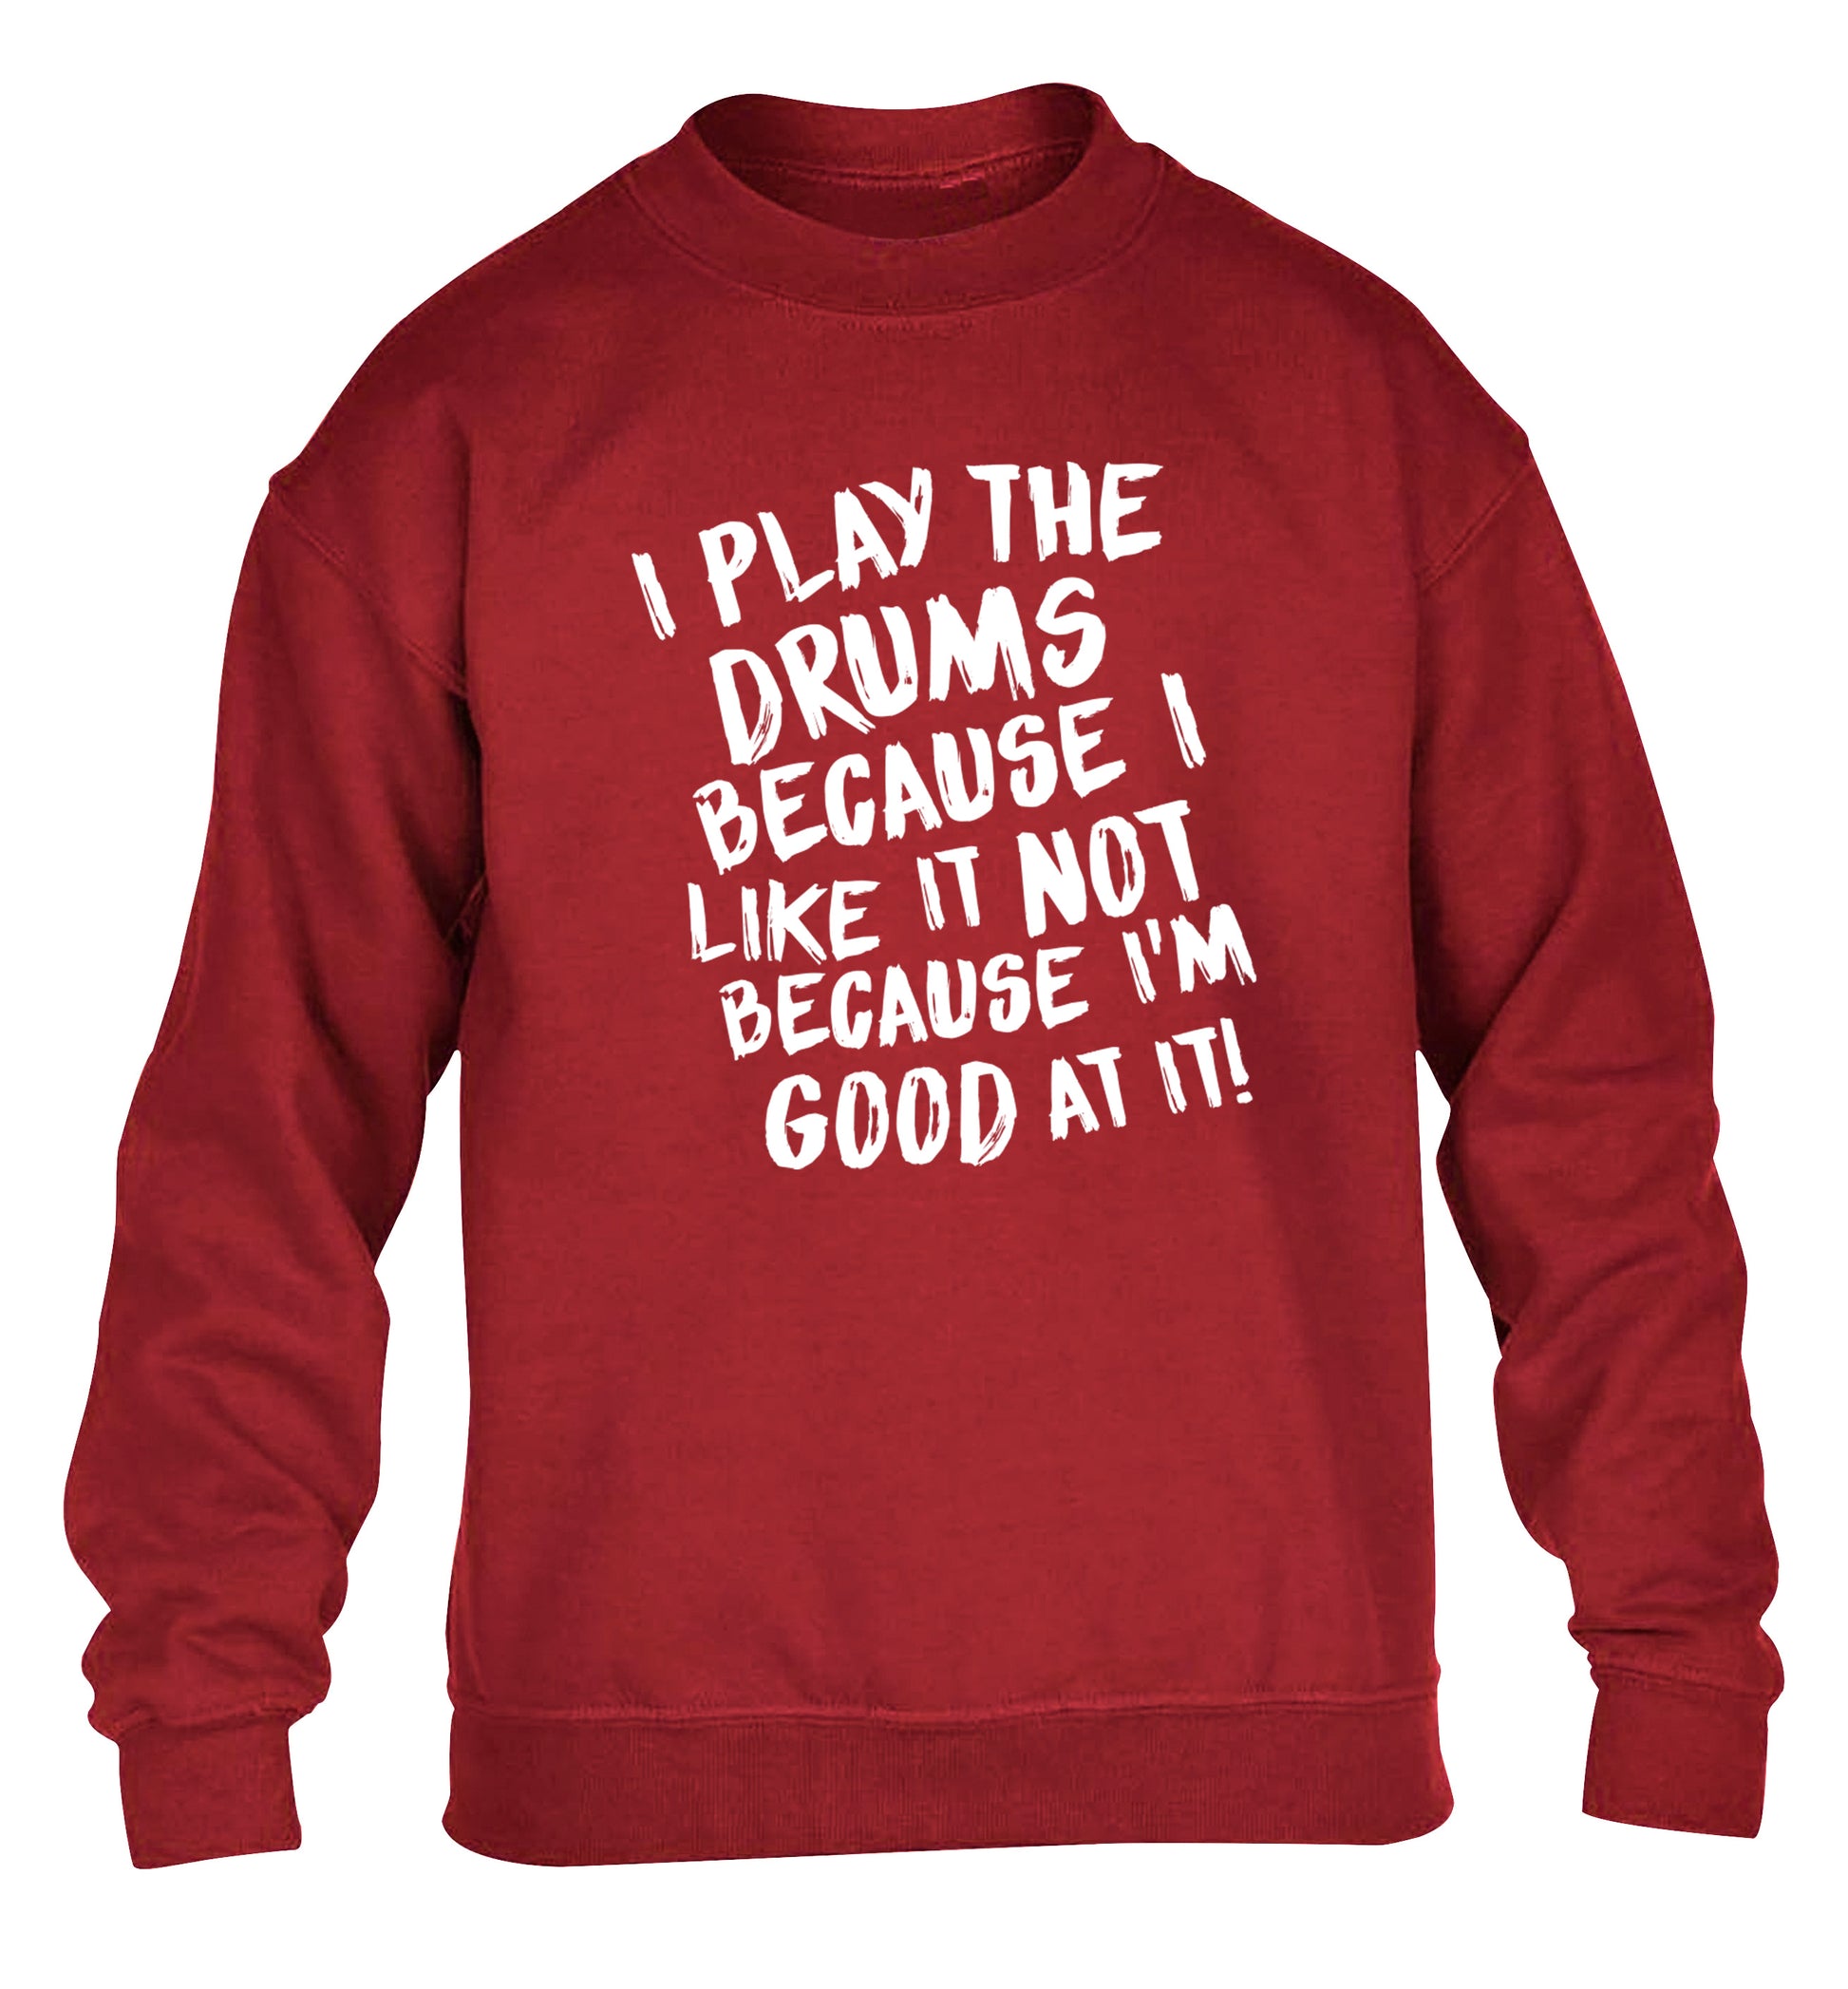 I play the drums because I like it not because I'm good at it children's grey sweater 12-14 Years